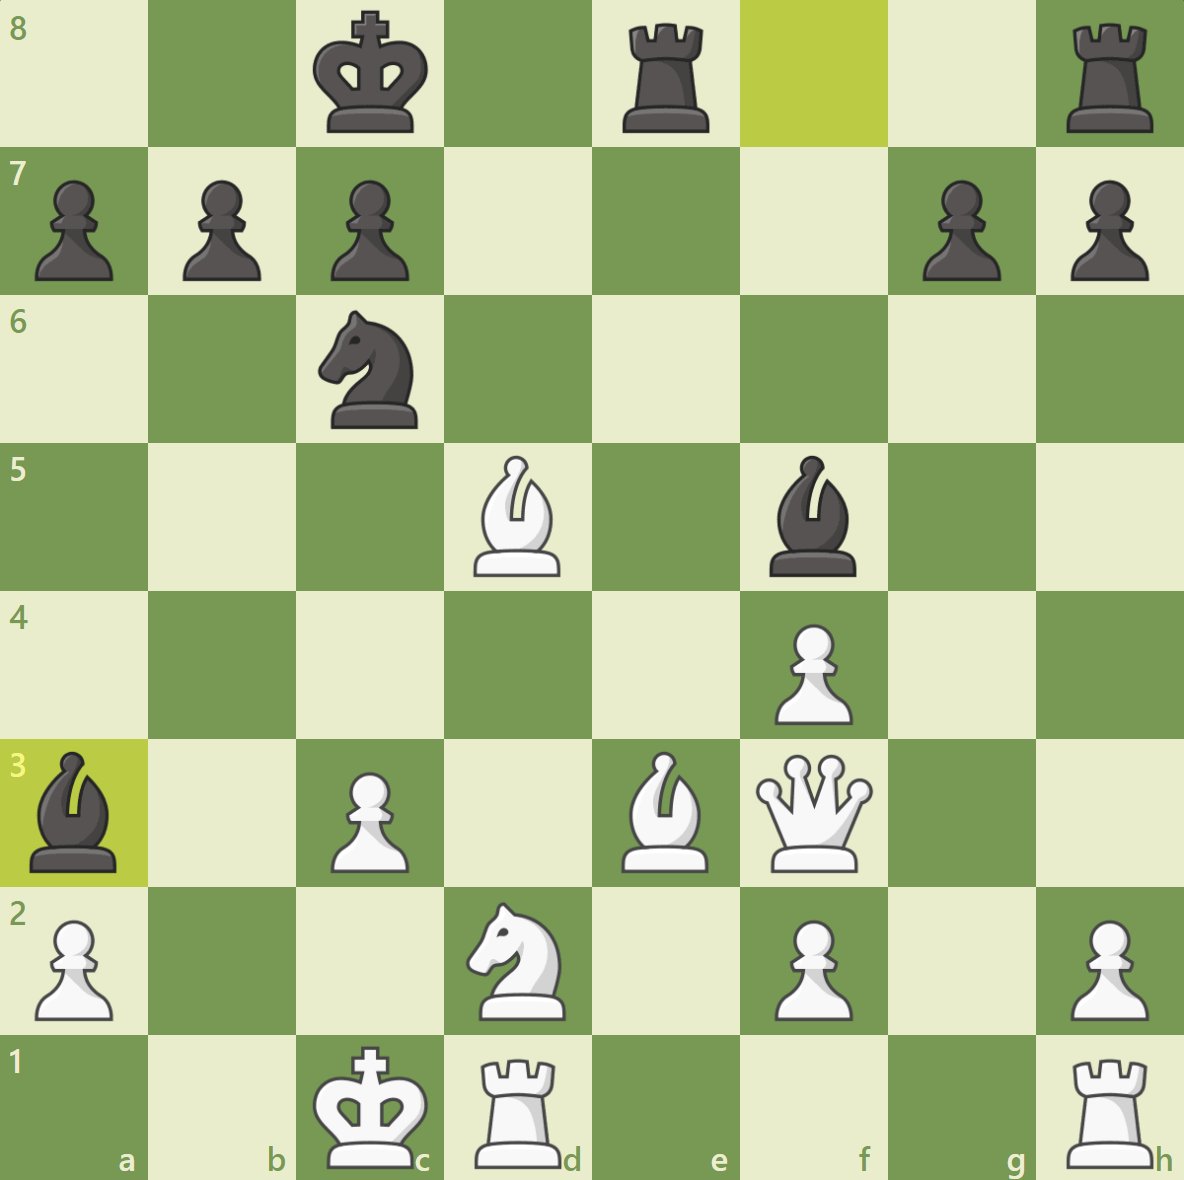 How does the Game Review work? - Chess.com Member Support and FAQs